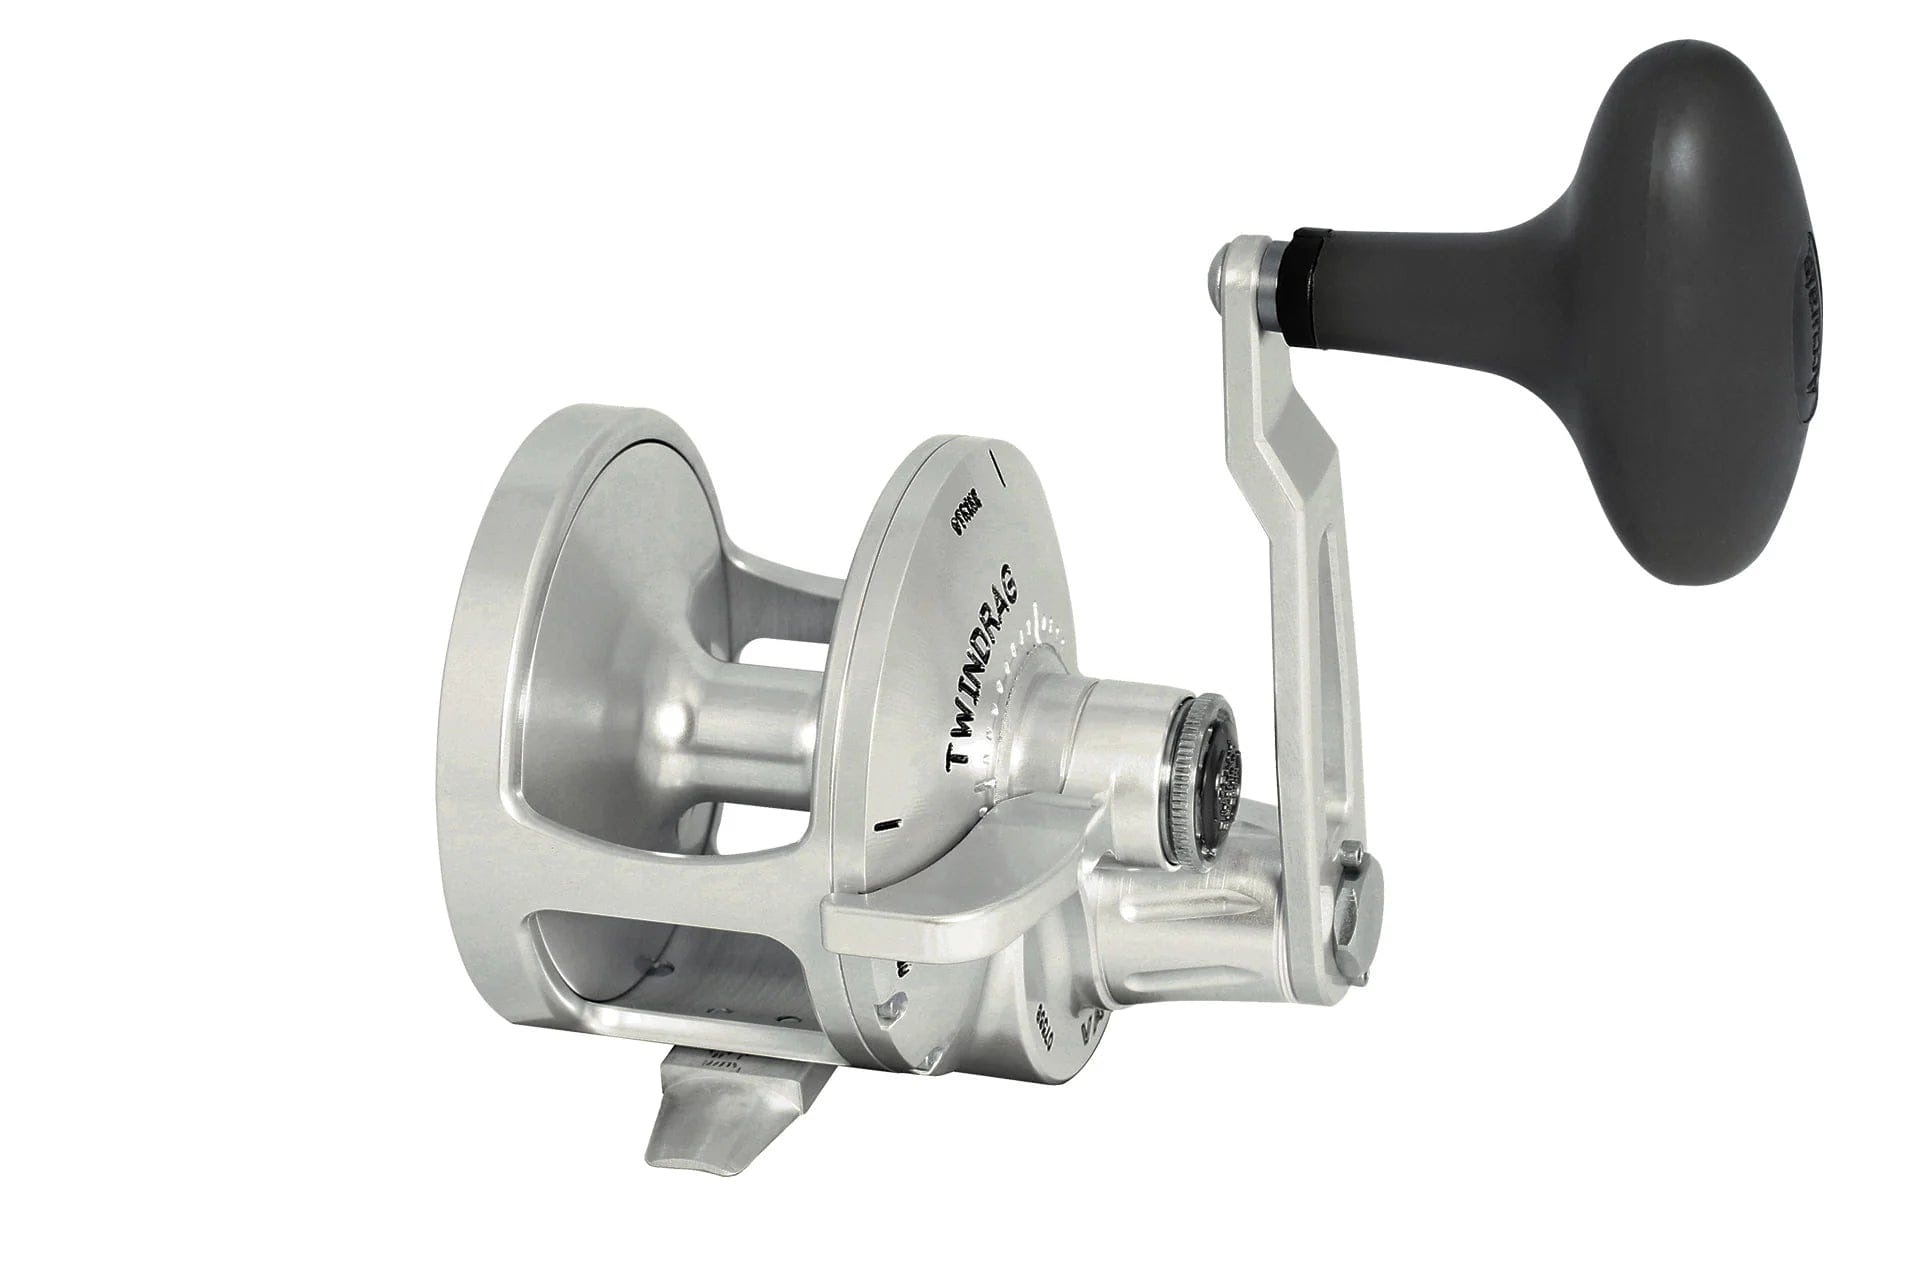 Accurate Accurate Tern2 Reel